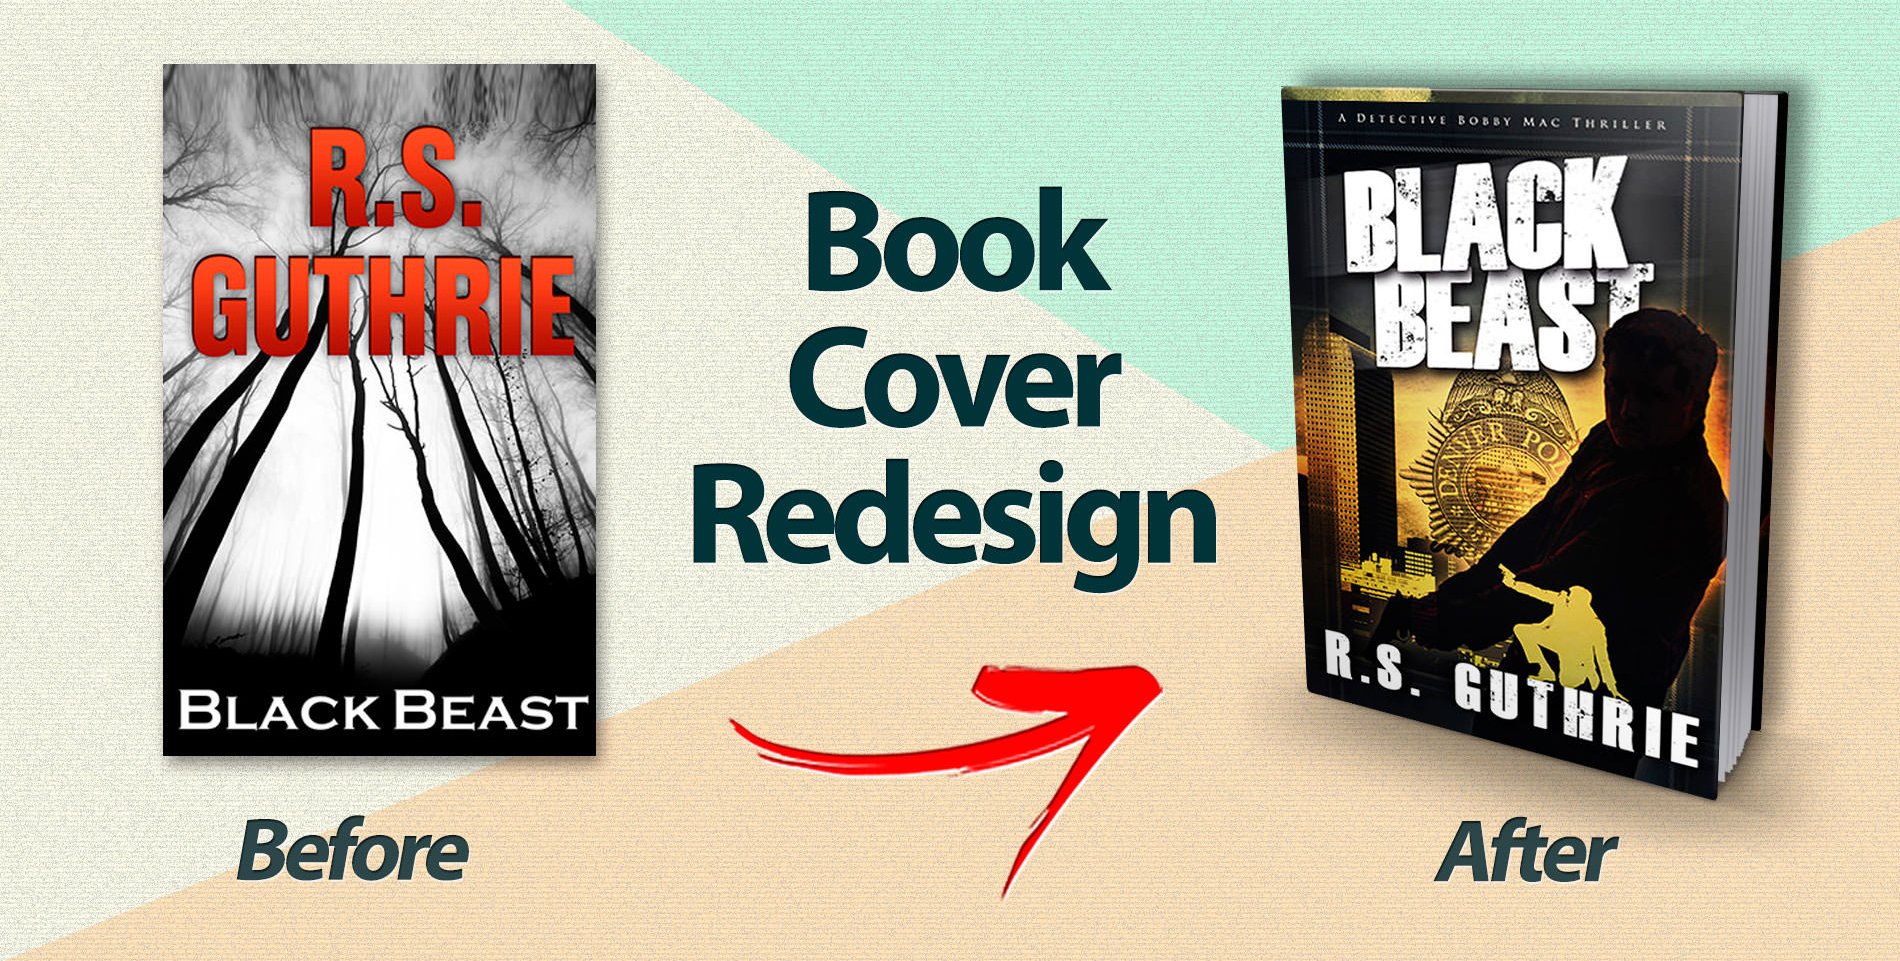 The cover of Black Beast before and after redesign